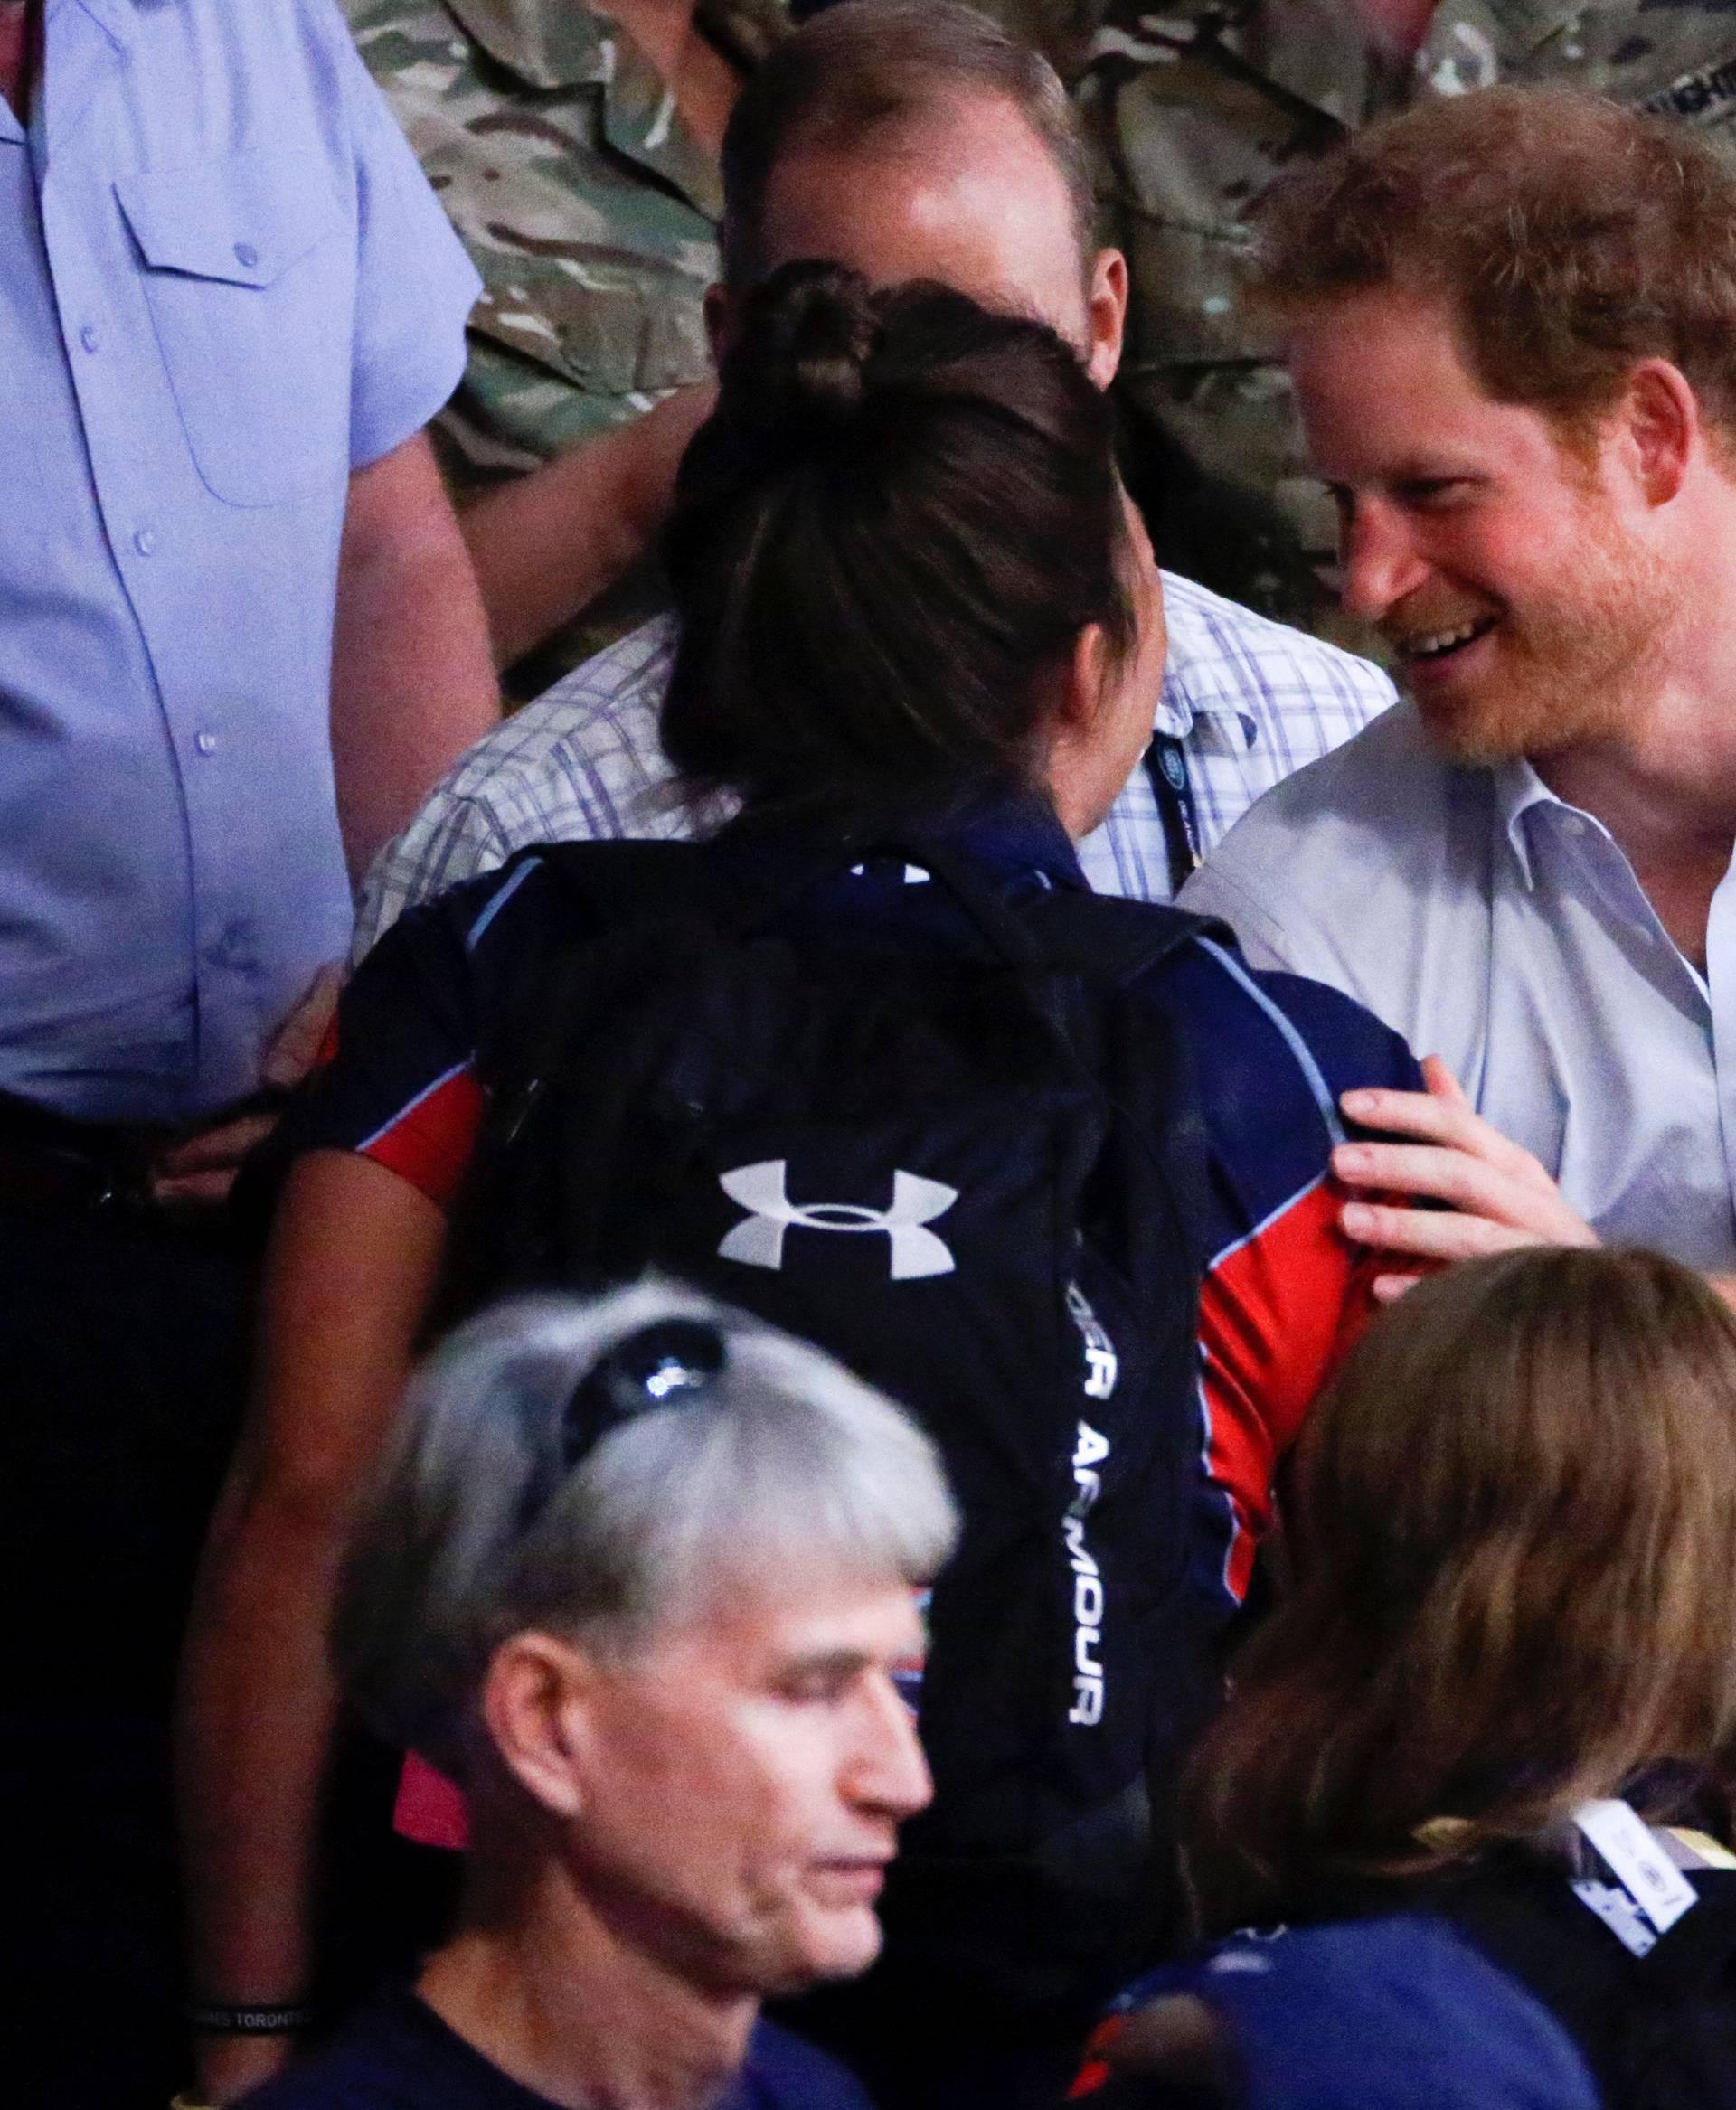 Britain's Prince Harry speaks to Elizabeth Marks of the U.S. during the bronze medal wheelchair rugby match at the Invictus Games in Orlando, Florida, U.S.